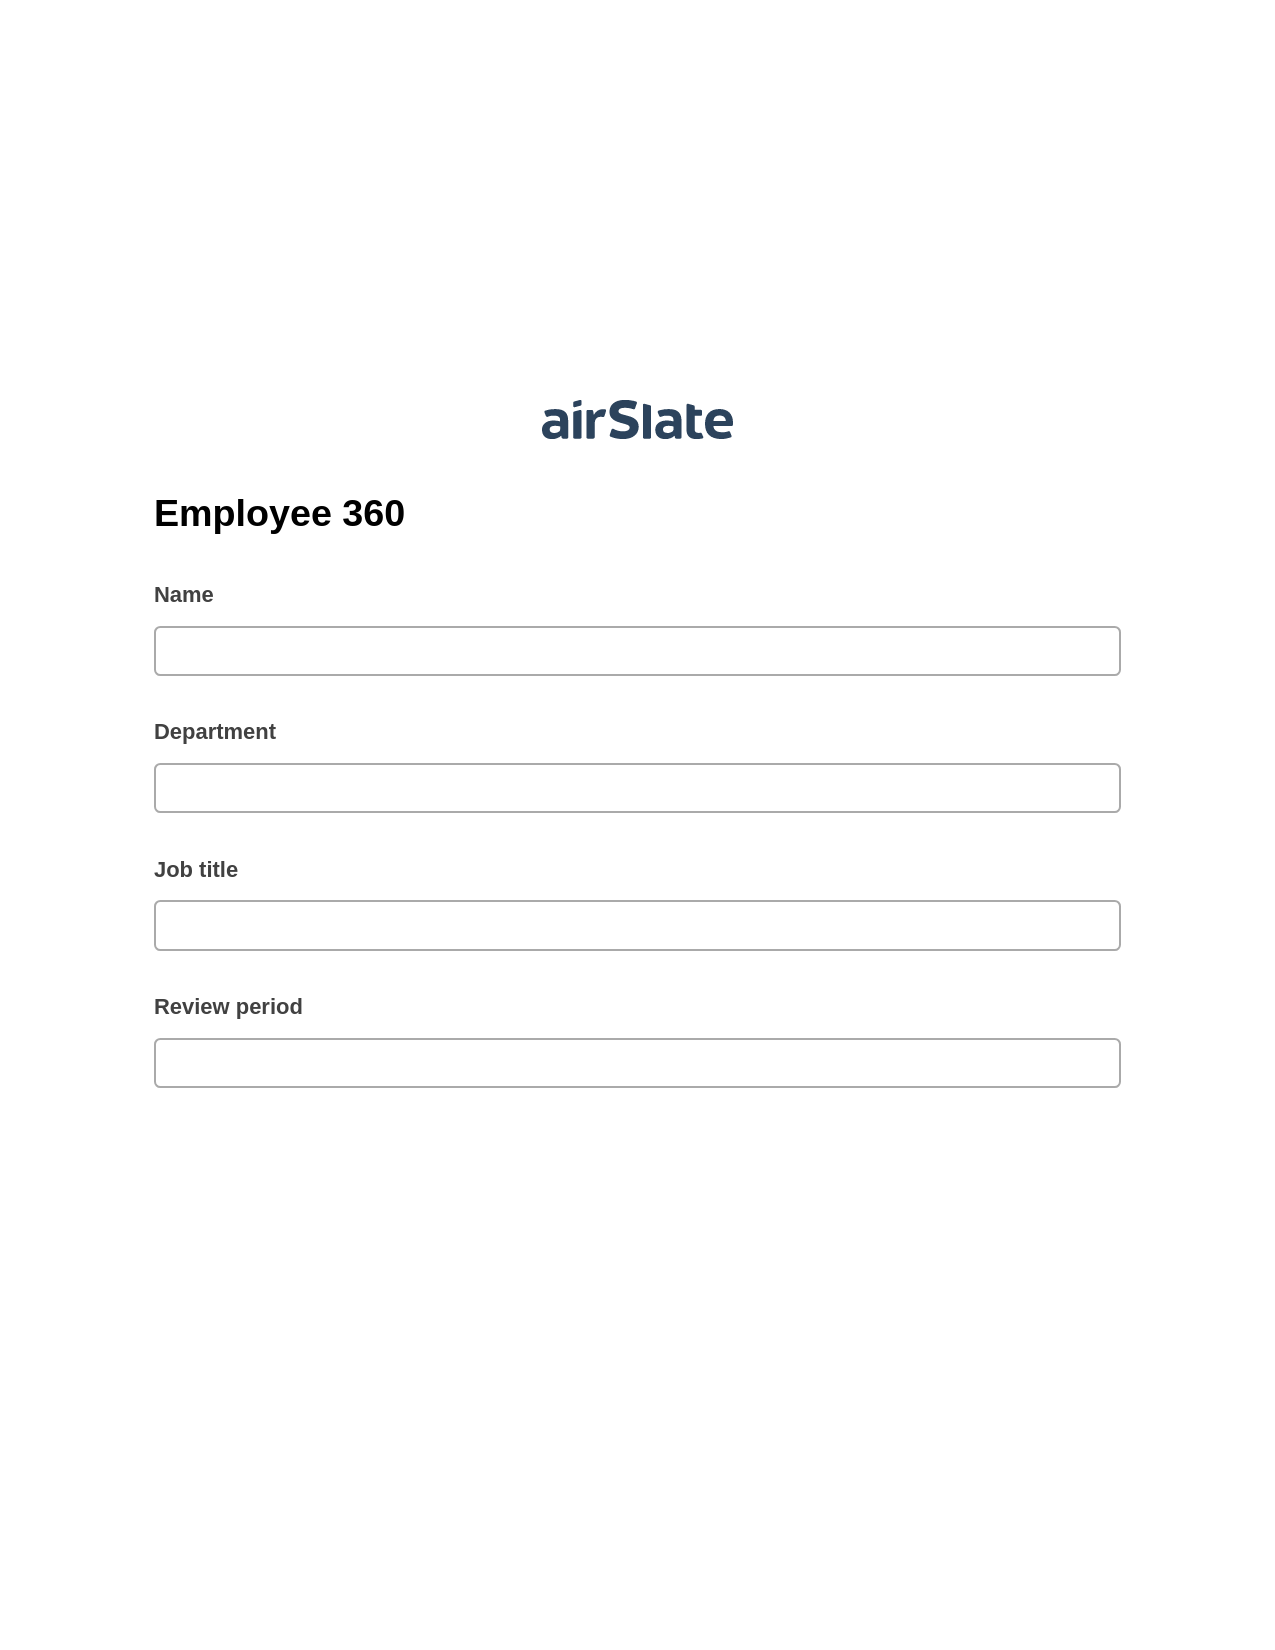 Multirole Employee 360 Pre-fill from MS Dynamics 365 Records, Add Tags to Slate Bot, Export to Google Sheet Bot